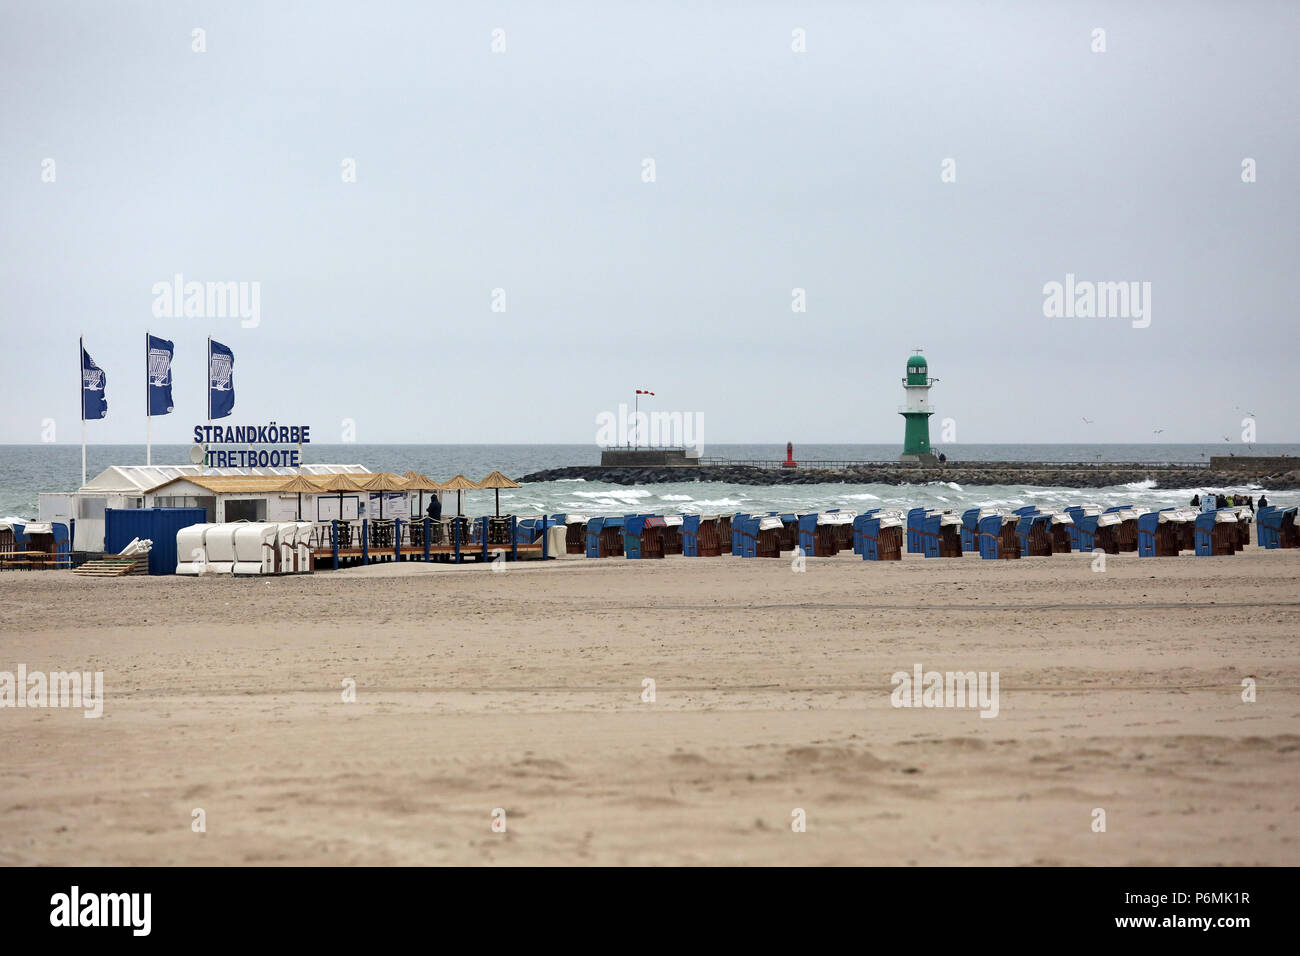 Warnemuende, beach chair and paddle boat rental on the beach Stock Photo